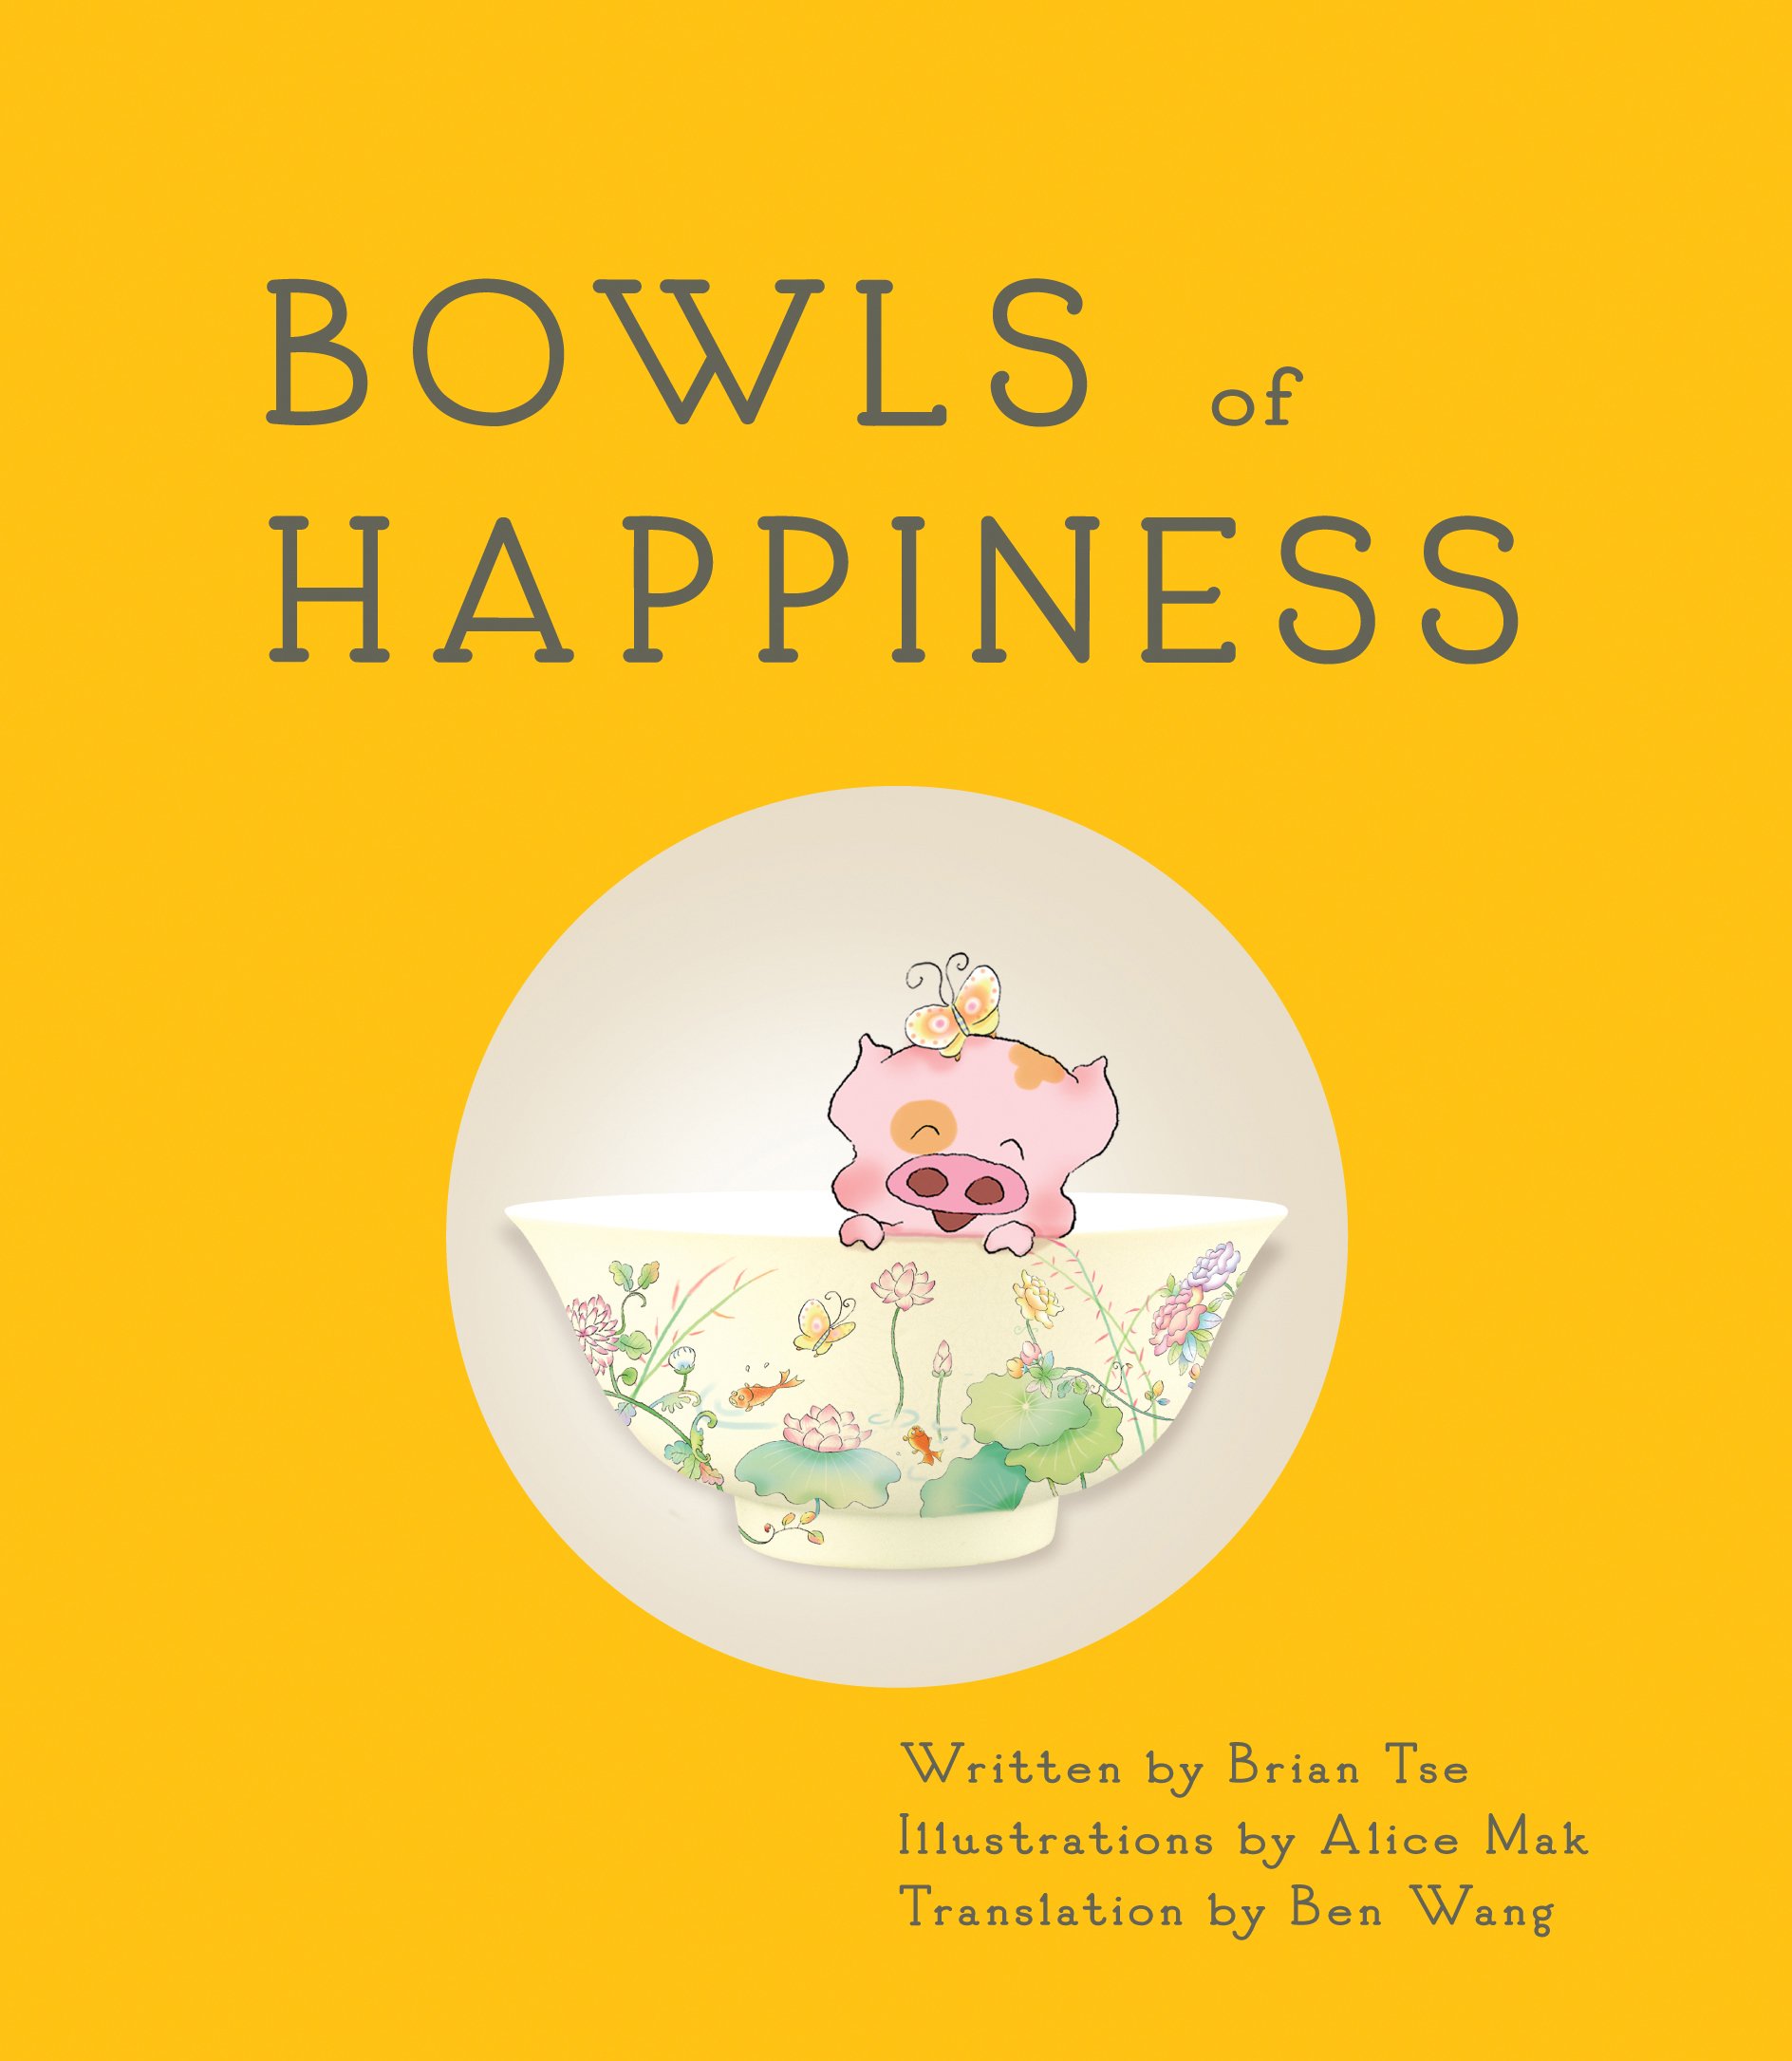 Bowls of Happiness Book Review